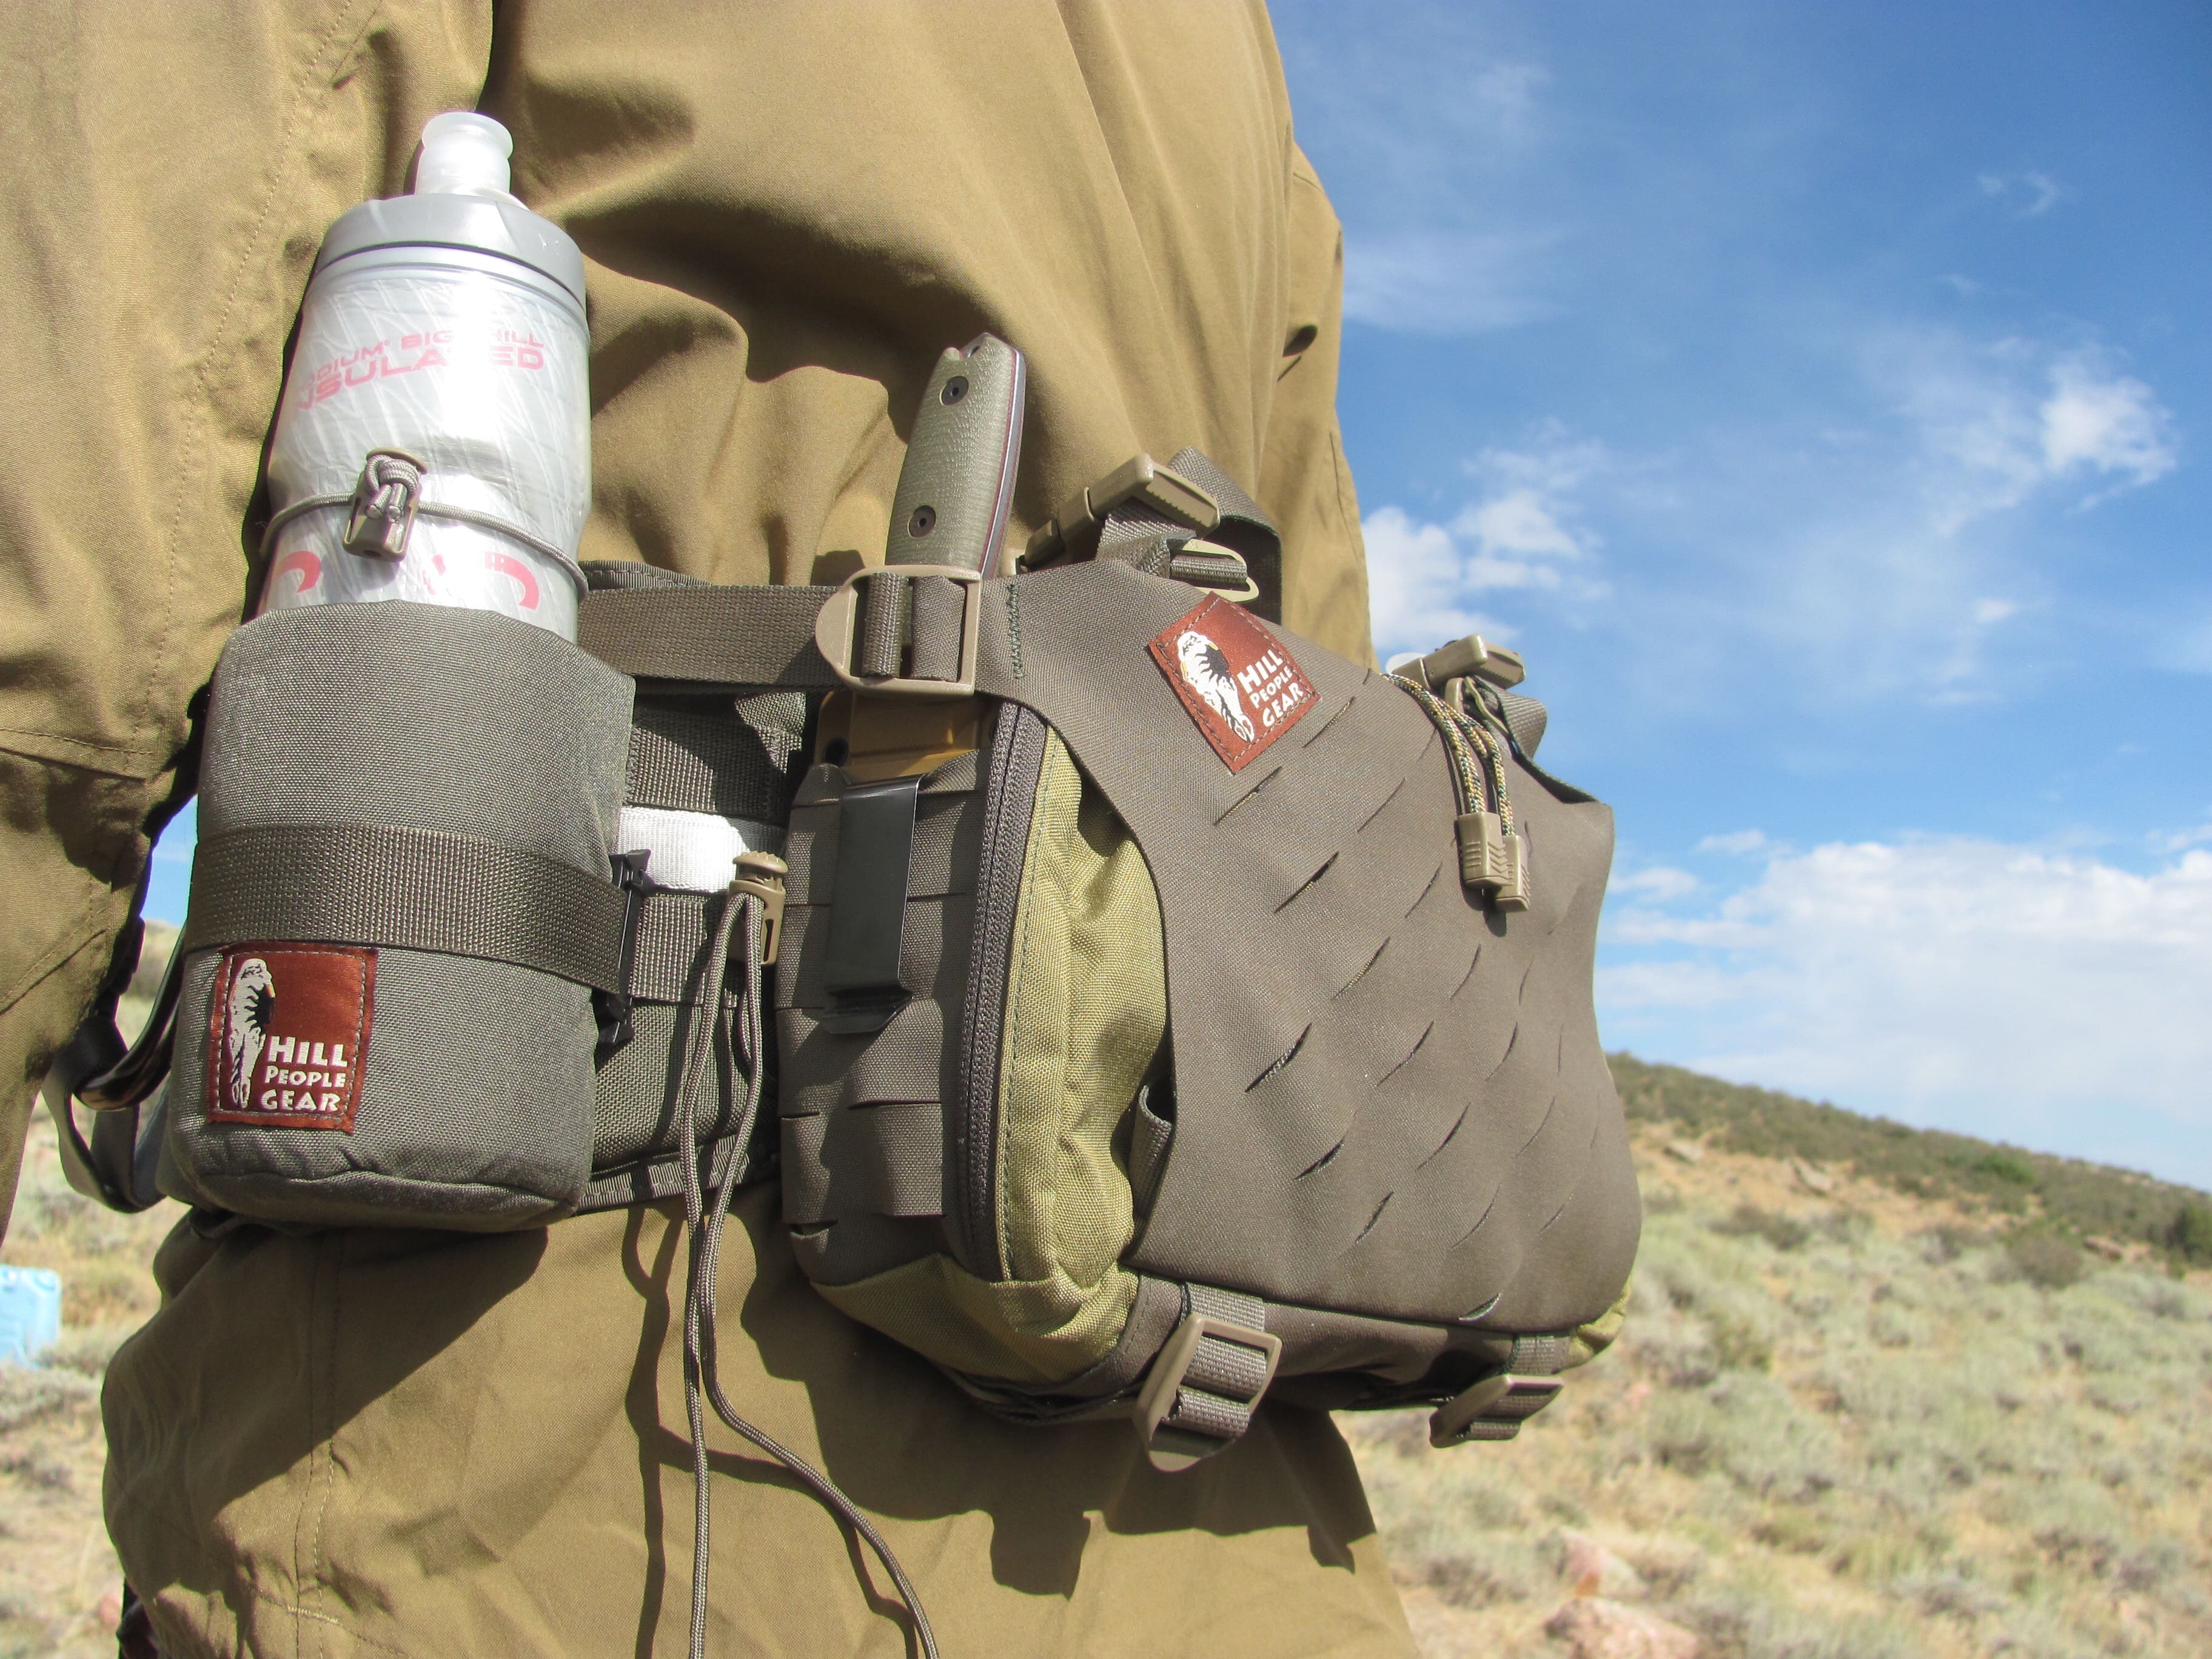 Hill People Gear - M2016 Butt Pack | Soldier Systems Daily Soldier ...